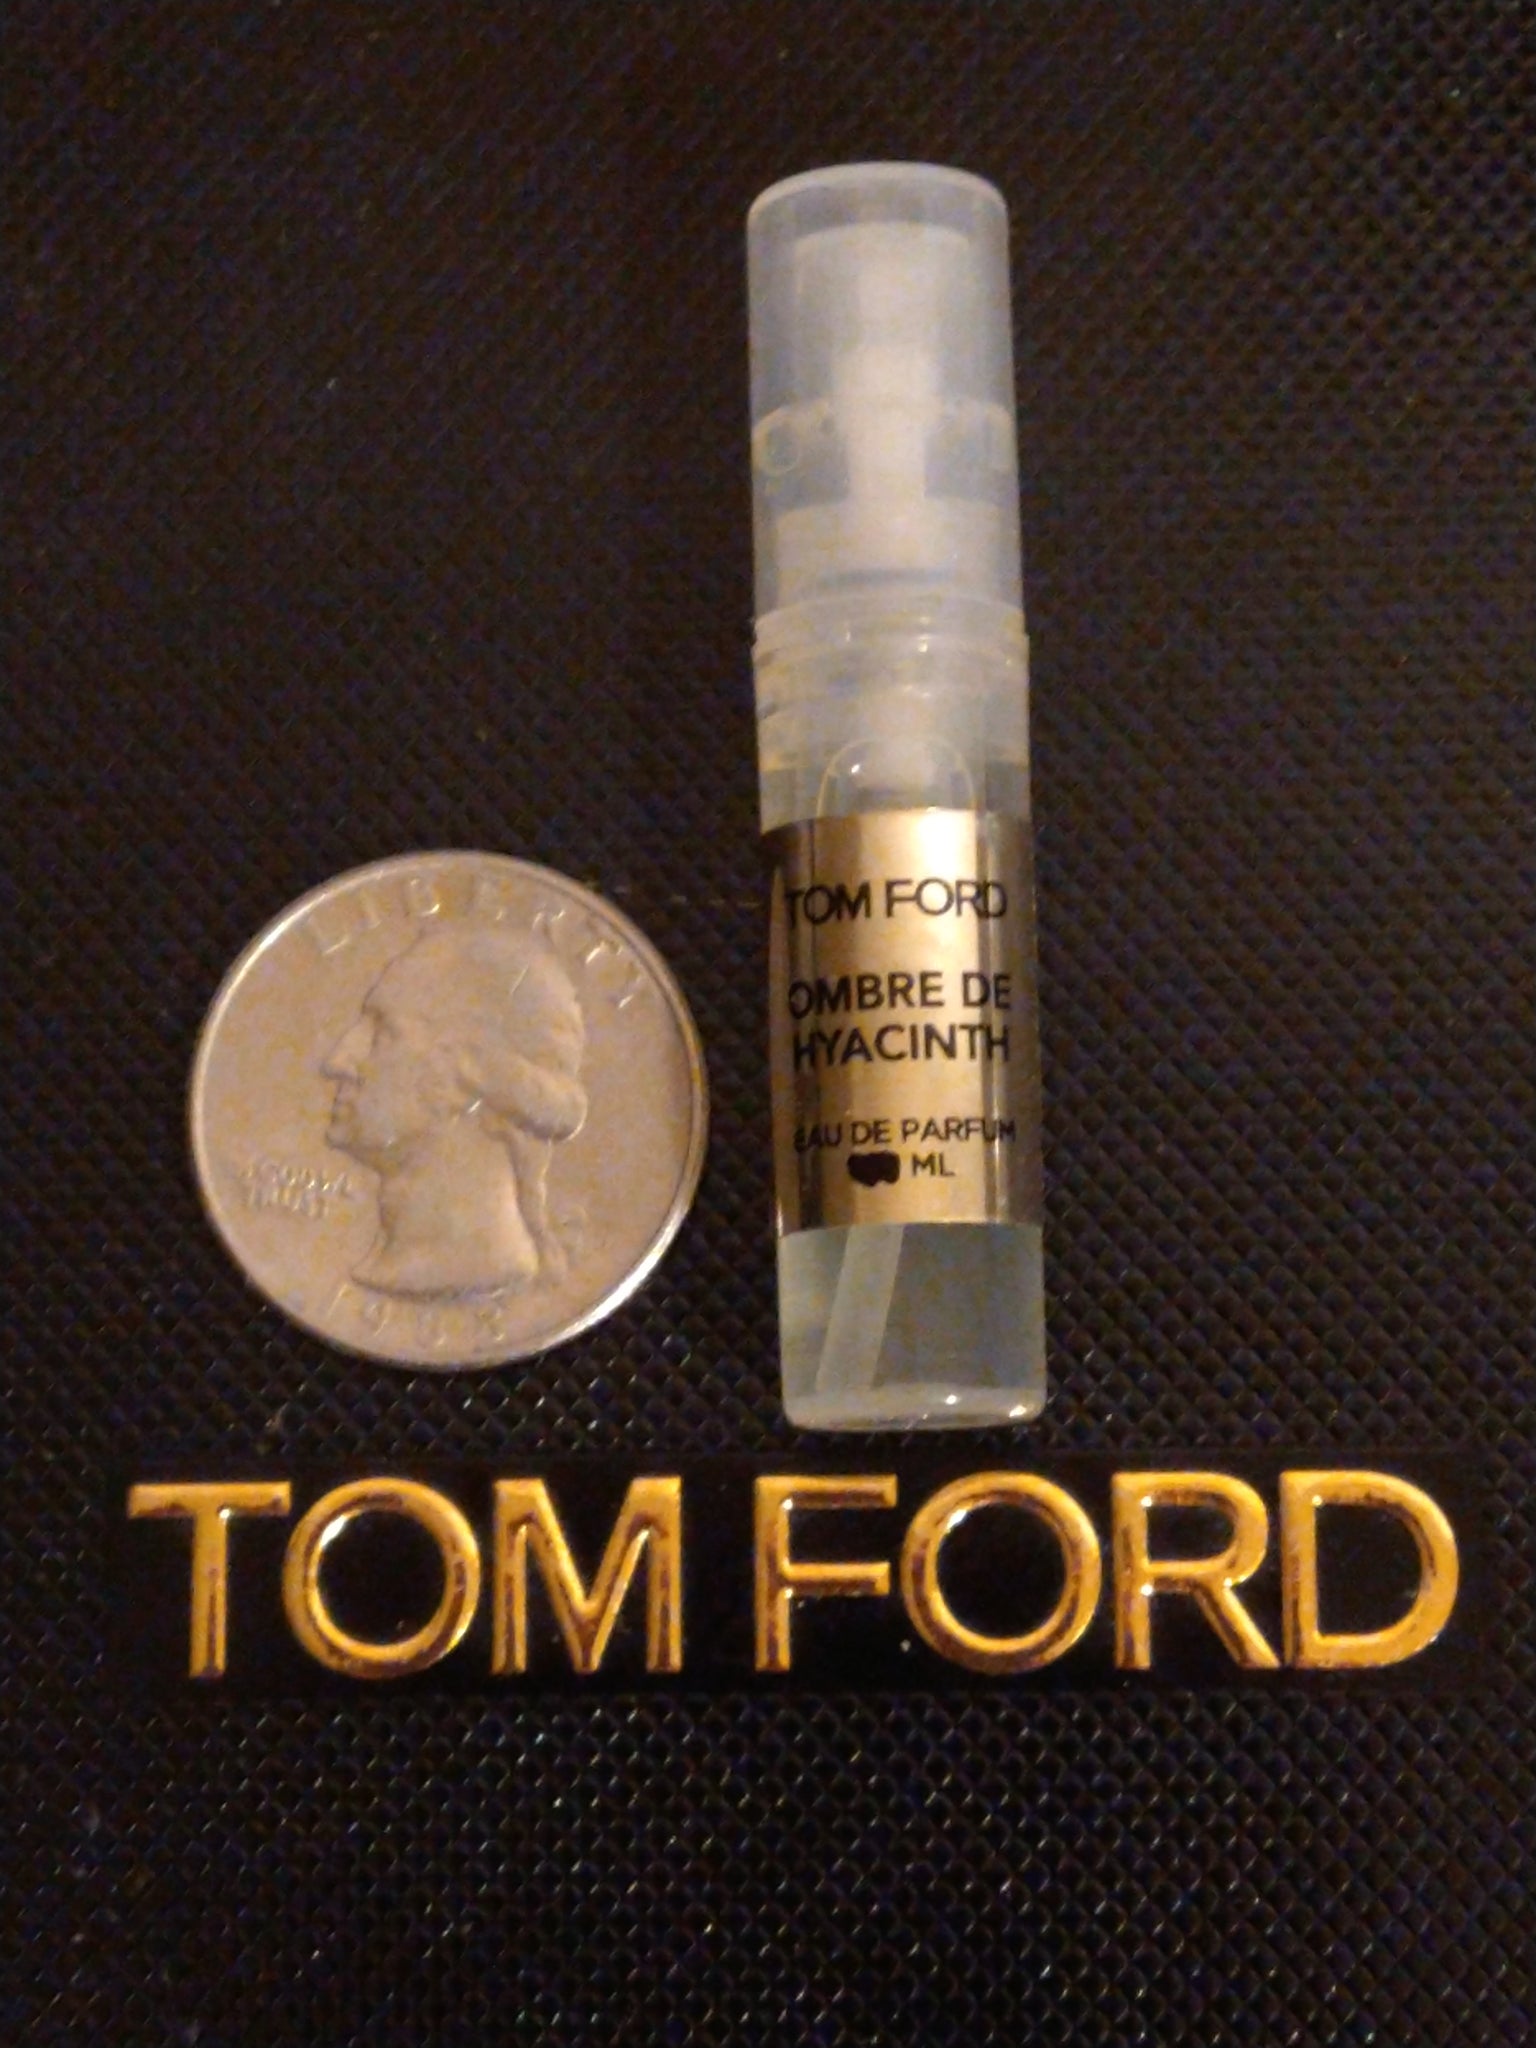 Ombre De Hyacinth Authentic Tom Ford Perfume Samples – TomFordPerfumeSamples